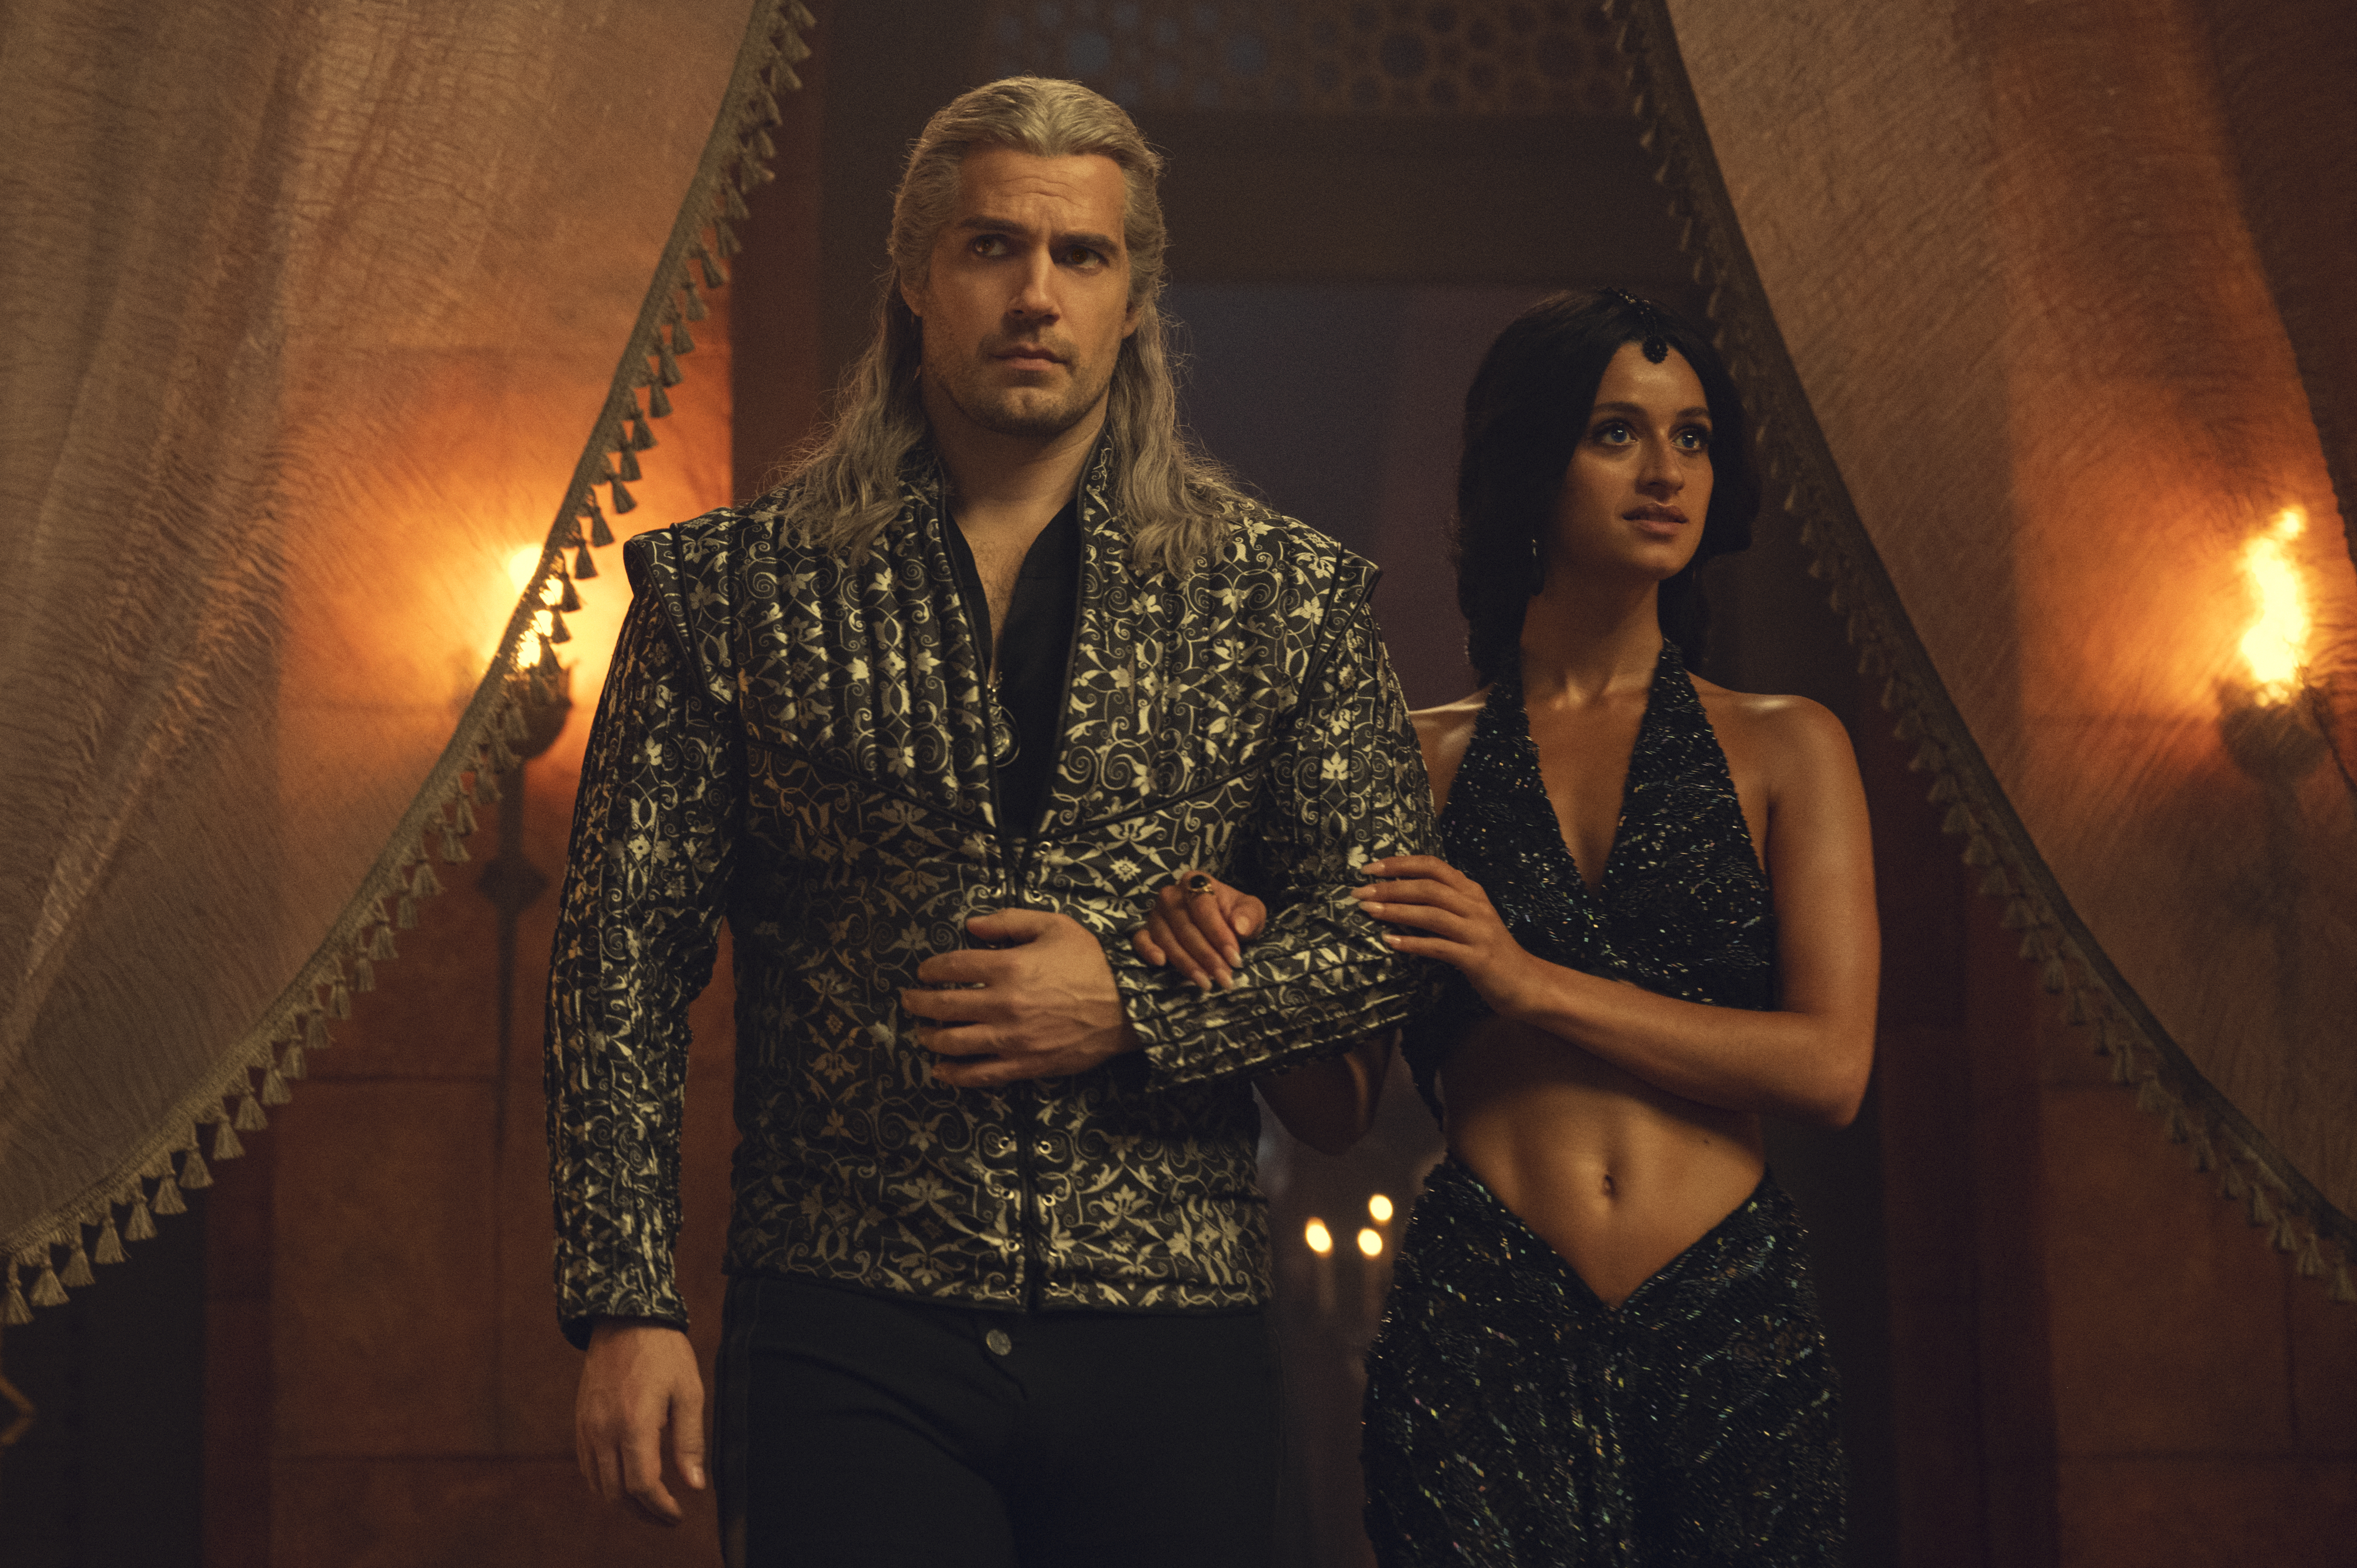 Geralt (Henry Cavill) and Yennefer (Anya Chalotra) walk into the conclave of mages arm in arm wearing their best evening wear in The Witcher.